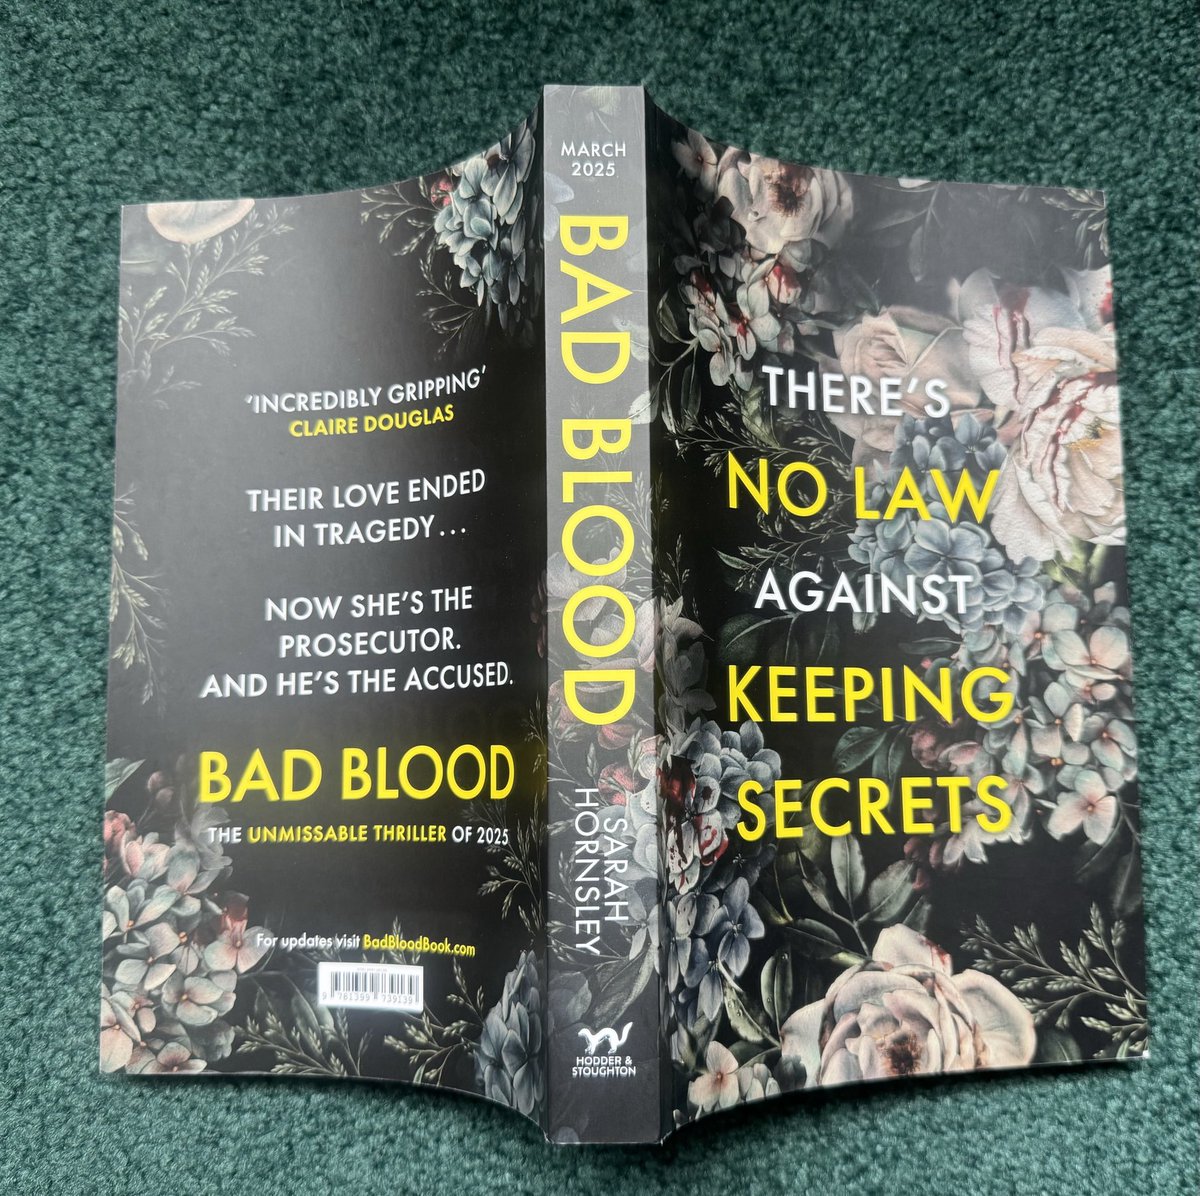 Happy Monday! ☀️ This gem arrived over the weekend to bless my tbr 😍#BadBlood by ⁦⁦@SarahHornsley⁩🩸 A barrister must build a murder case against her ex despite her own tricky secrets ⚖️ Who doesn’t love a legal thriller? Thanks ⁦@HodderFiction⁩ 🙏 Out in March 25